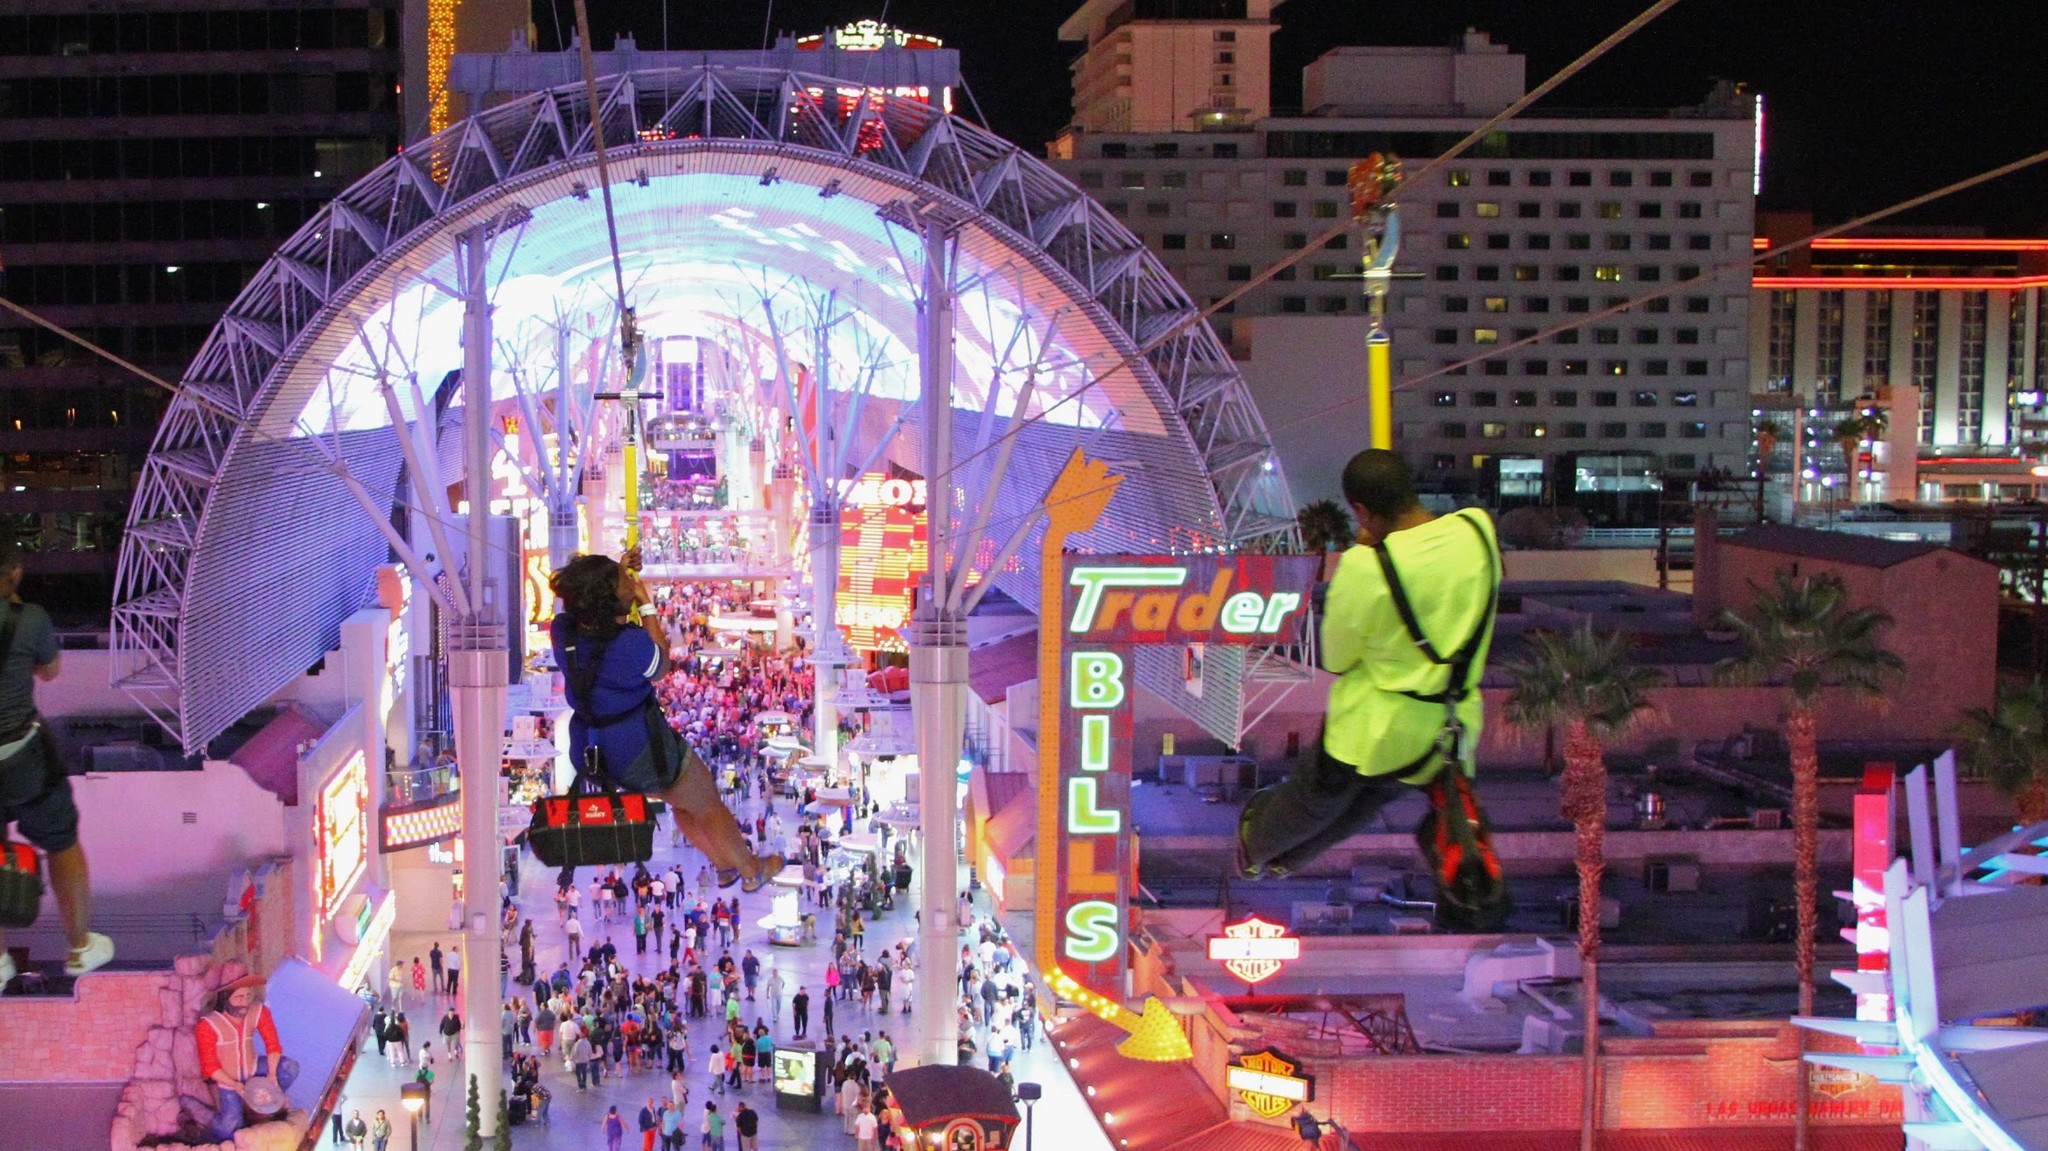 Riders soar above the crowds under the Fremont Street canopy during the Slotzilla experience in downtown Las Vegas.